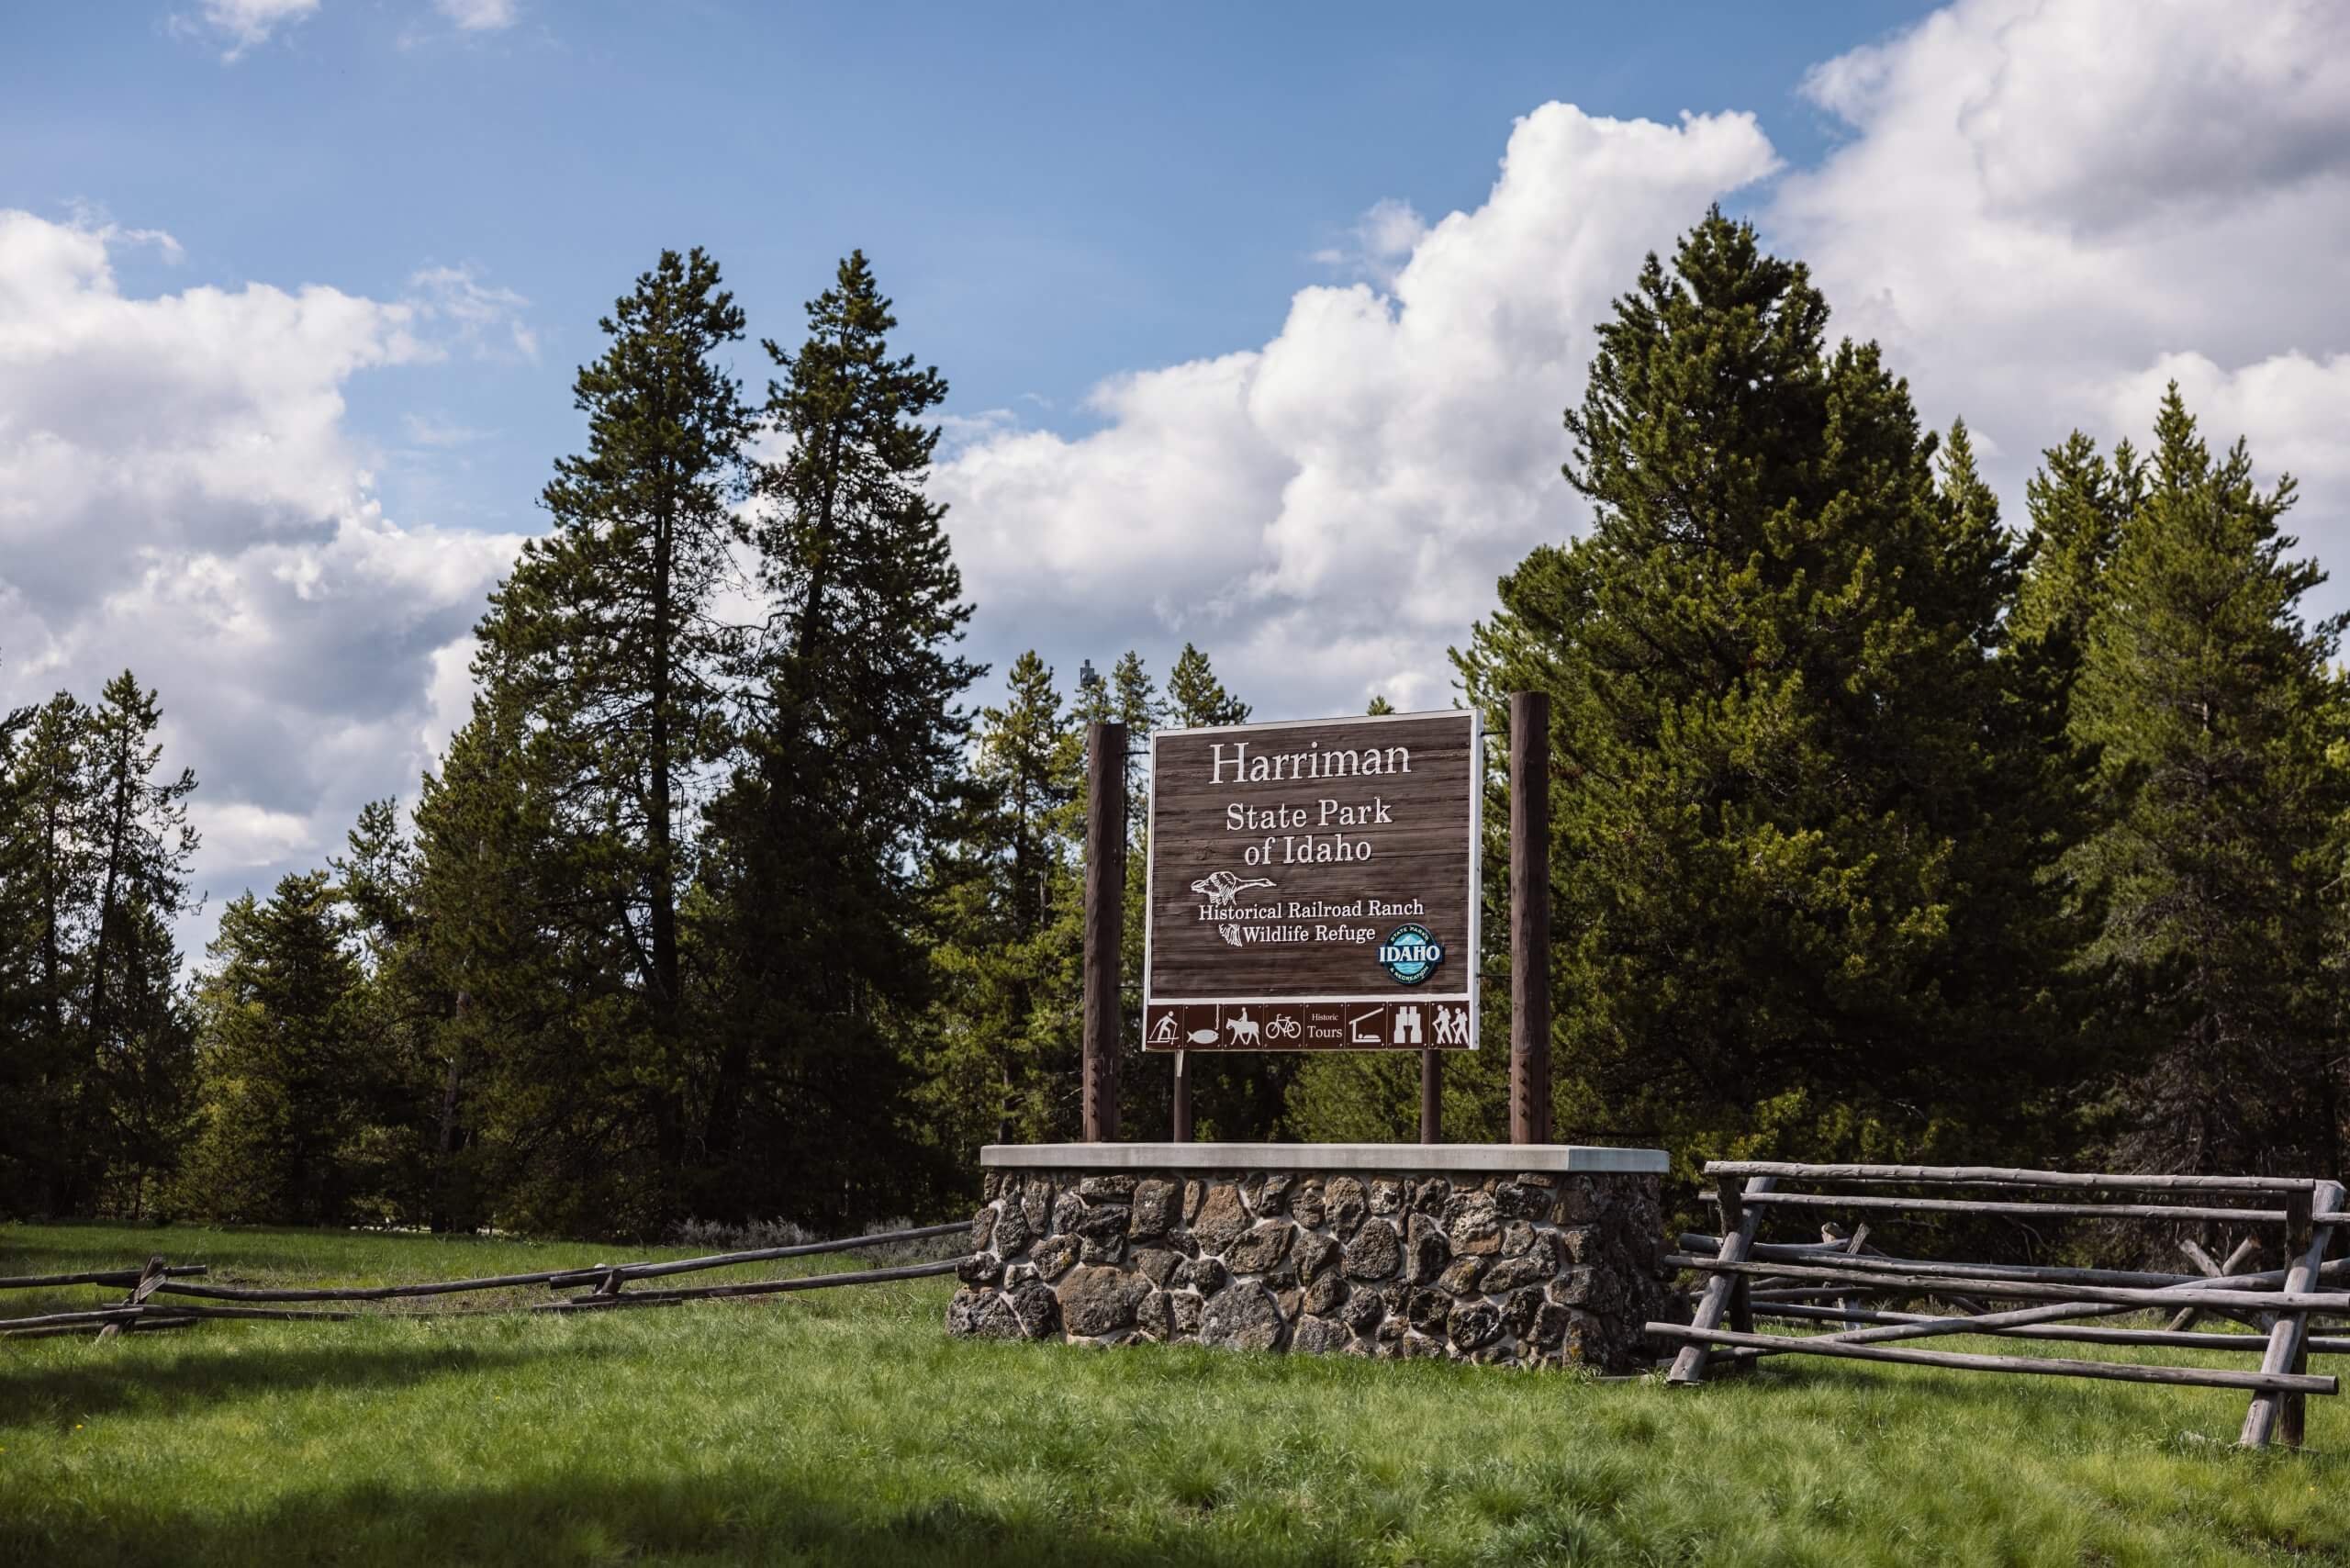 A sign for Harriman State Park of Idaho.